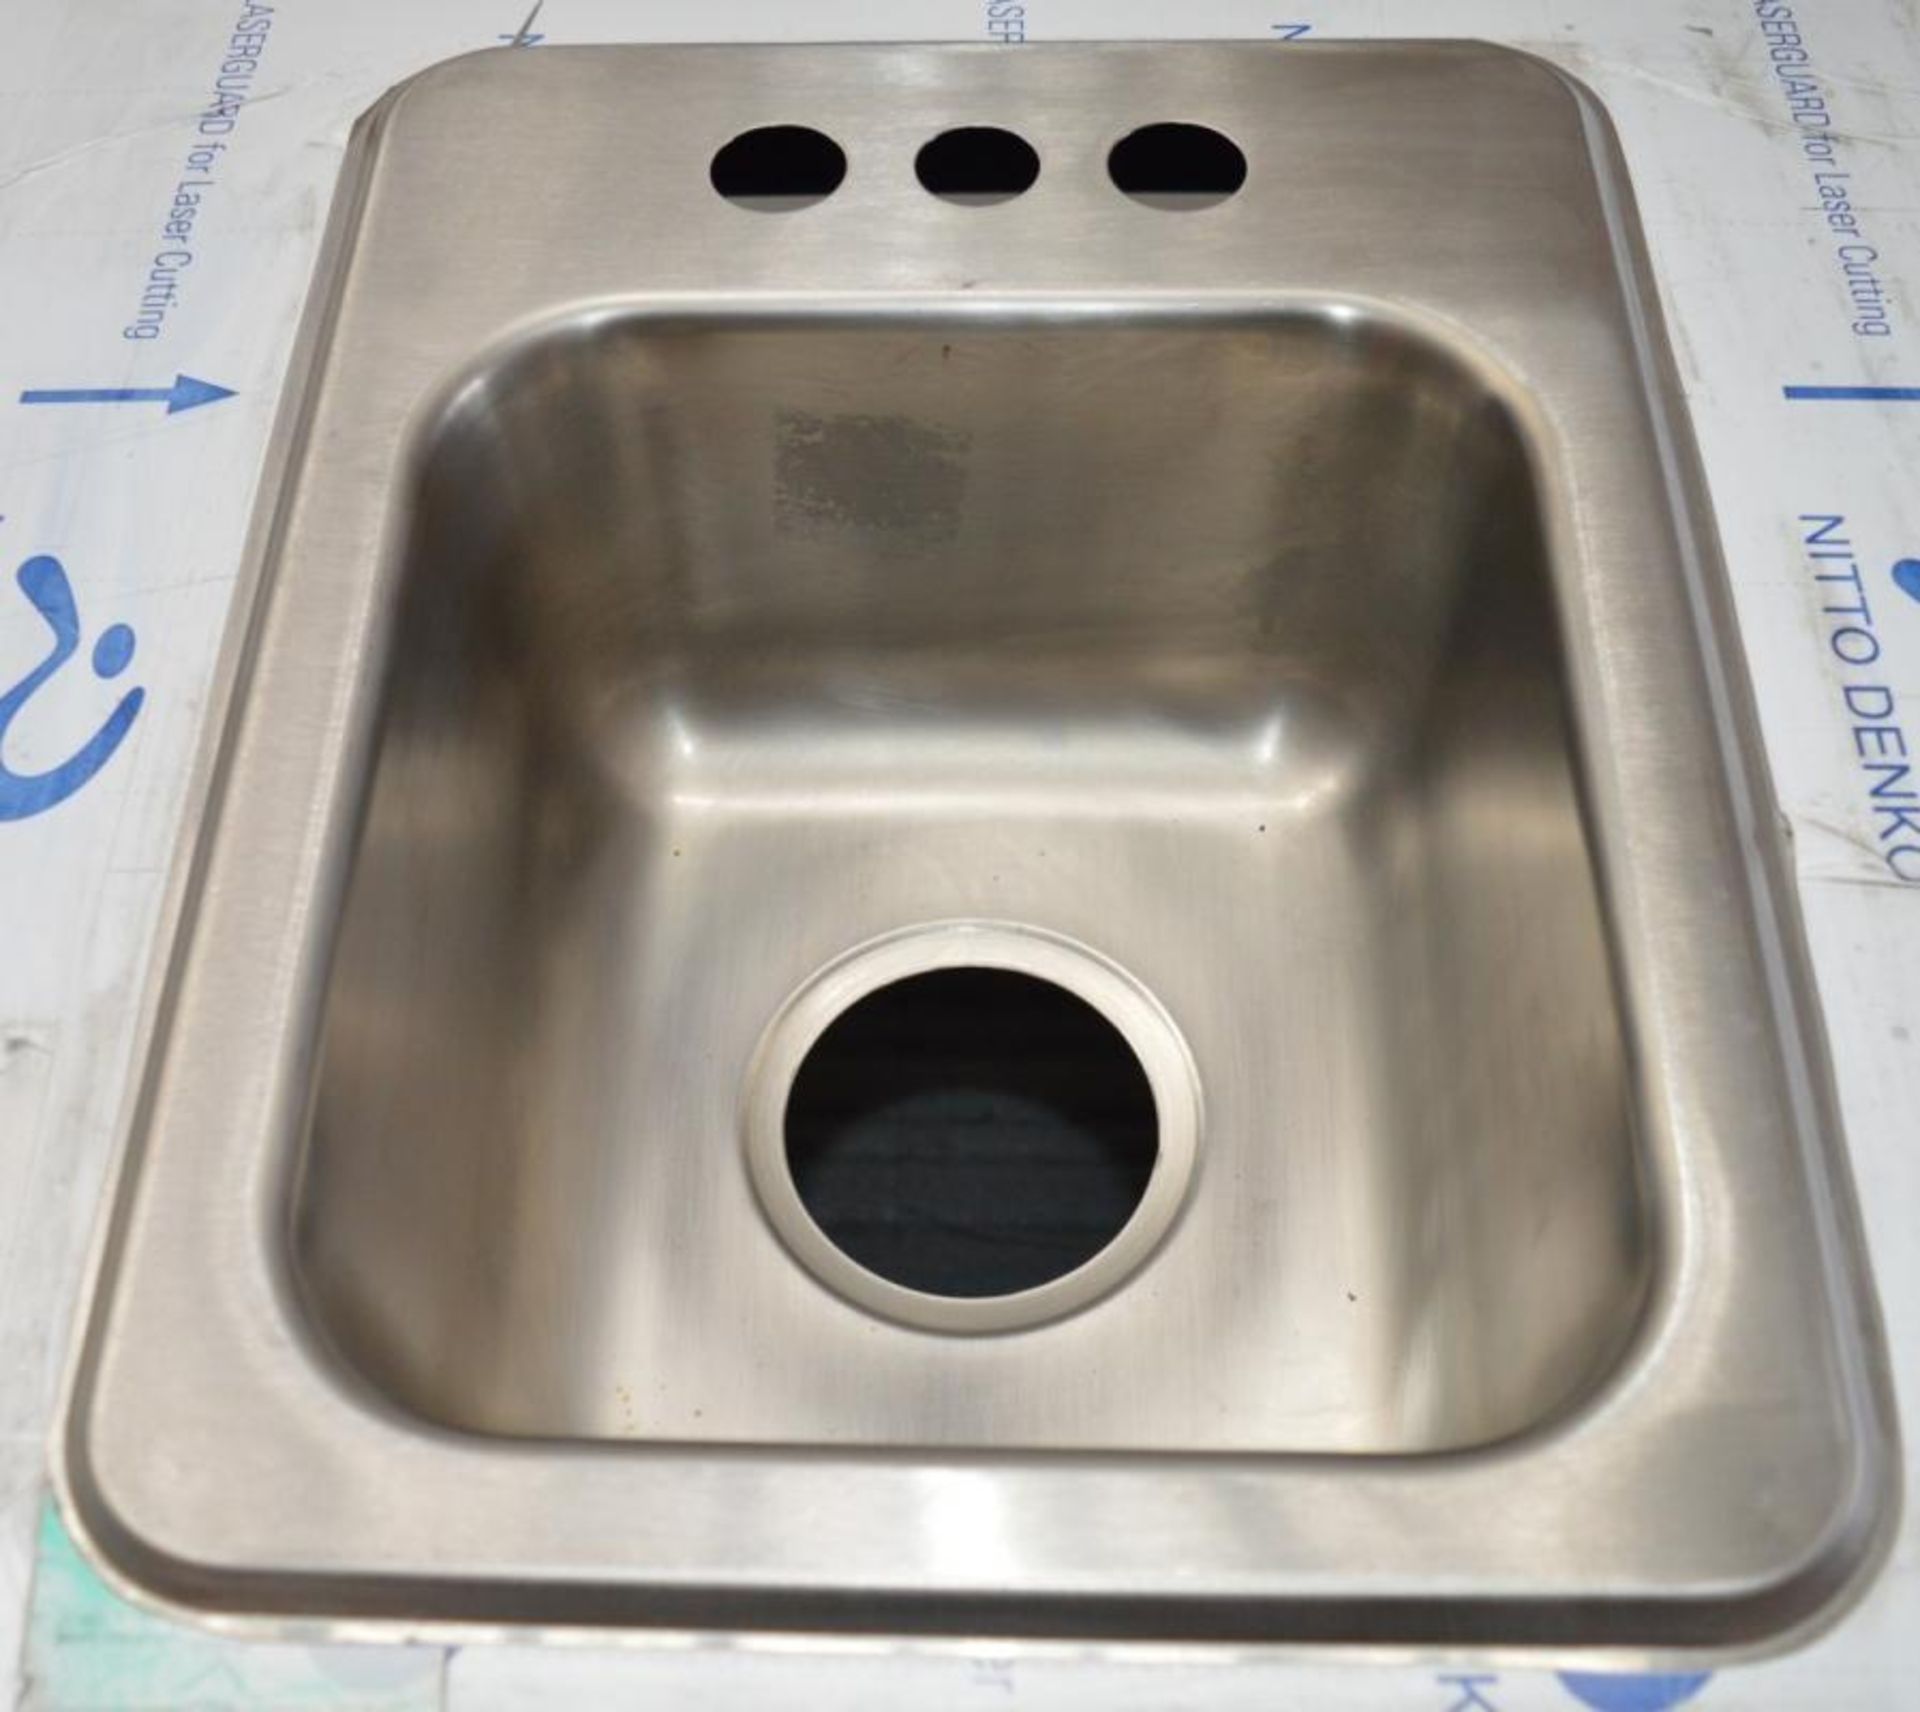 1 x Duke Stainless Steel Sink Basin Unit With Wood Finish Cabinet - Unused With Protective Film Atta - Image 7 of 7